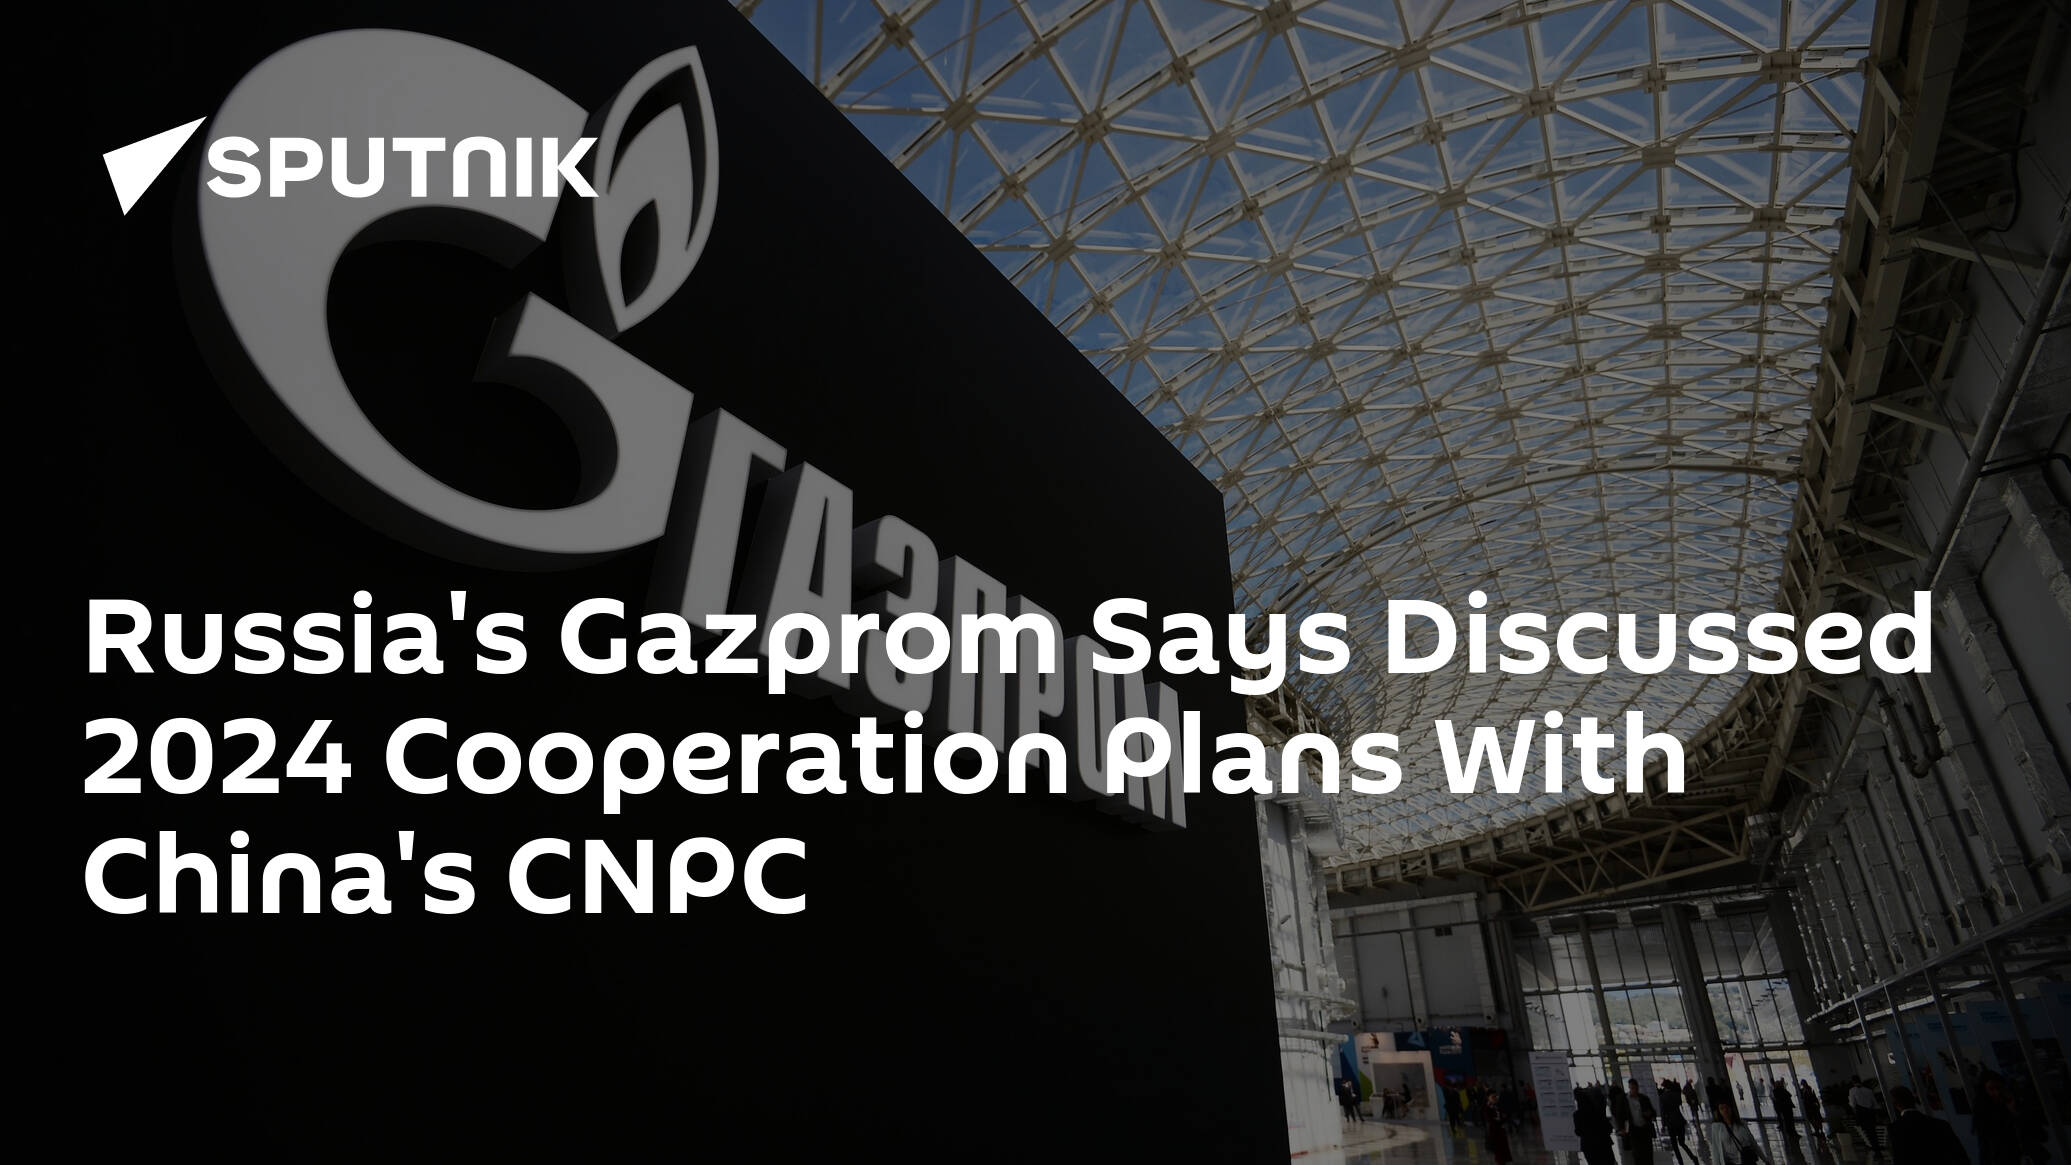 Russia's Gazprom Says Discussed 2024 Cooperation Plans With China's CNPC